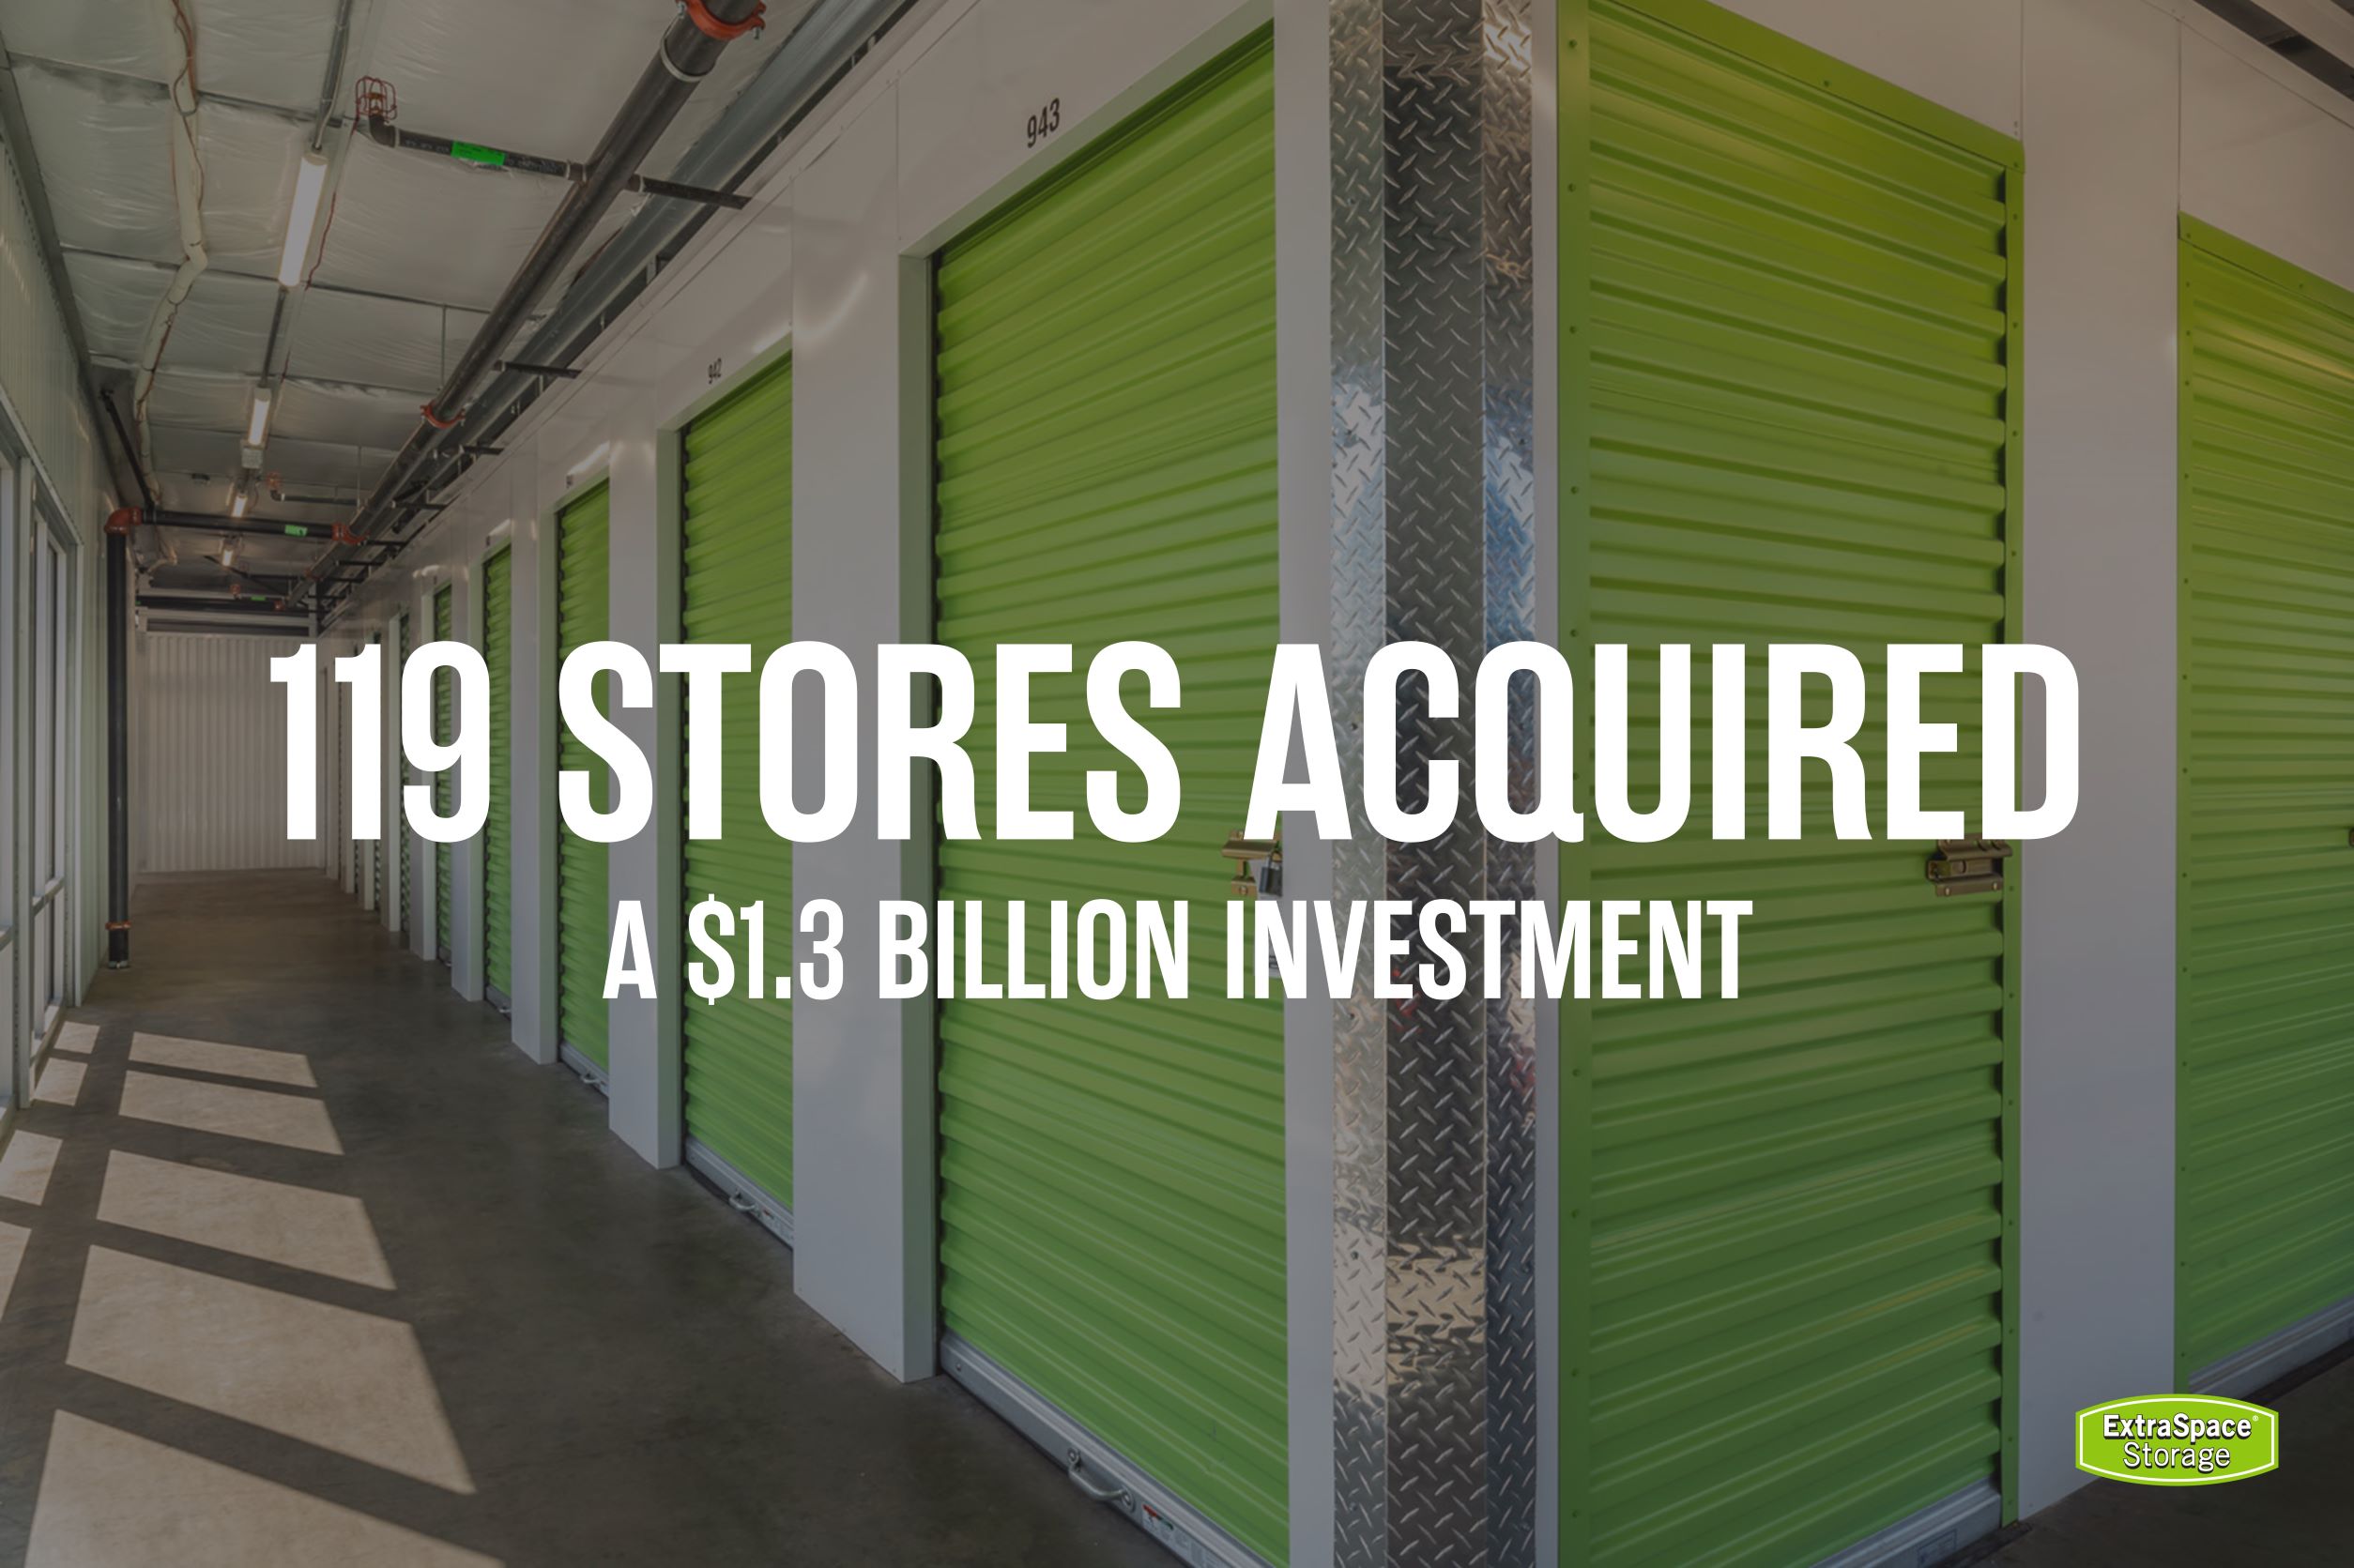 Graphic with text "119 Stores Acquired, a $1.3 billion investment"